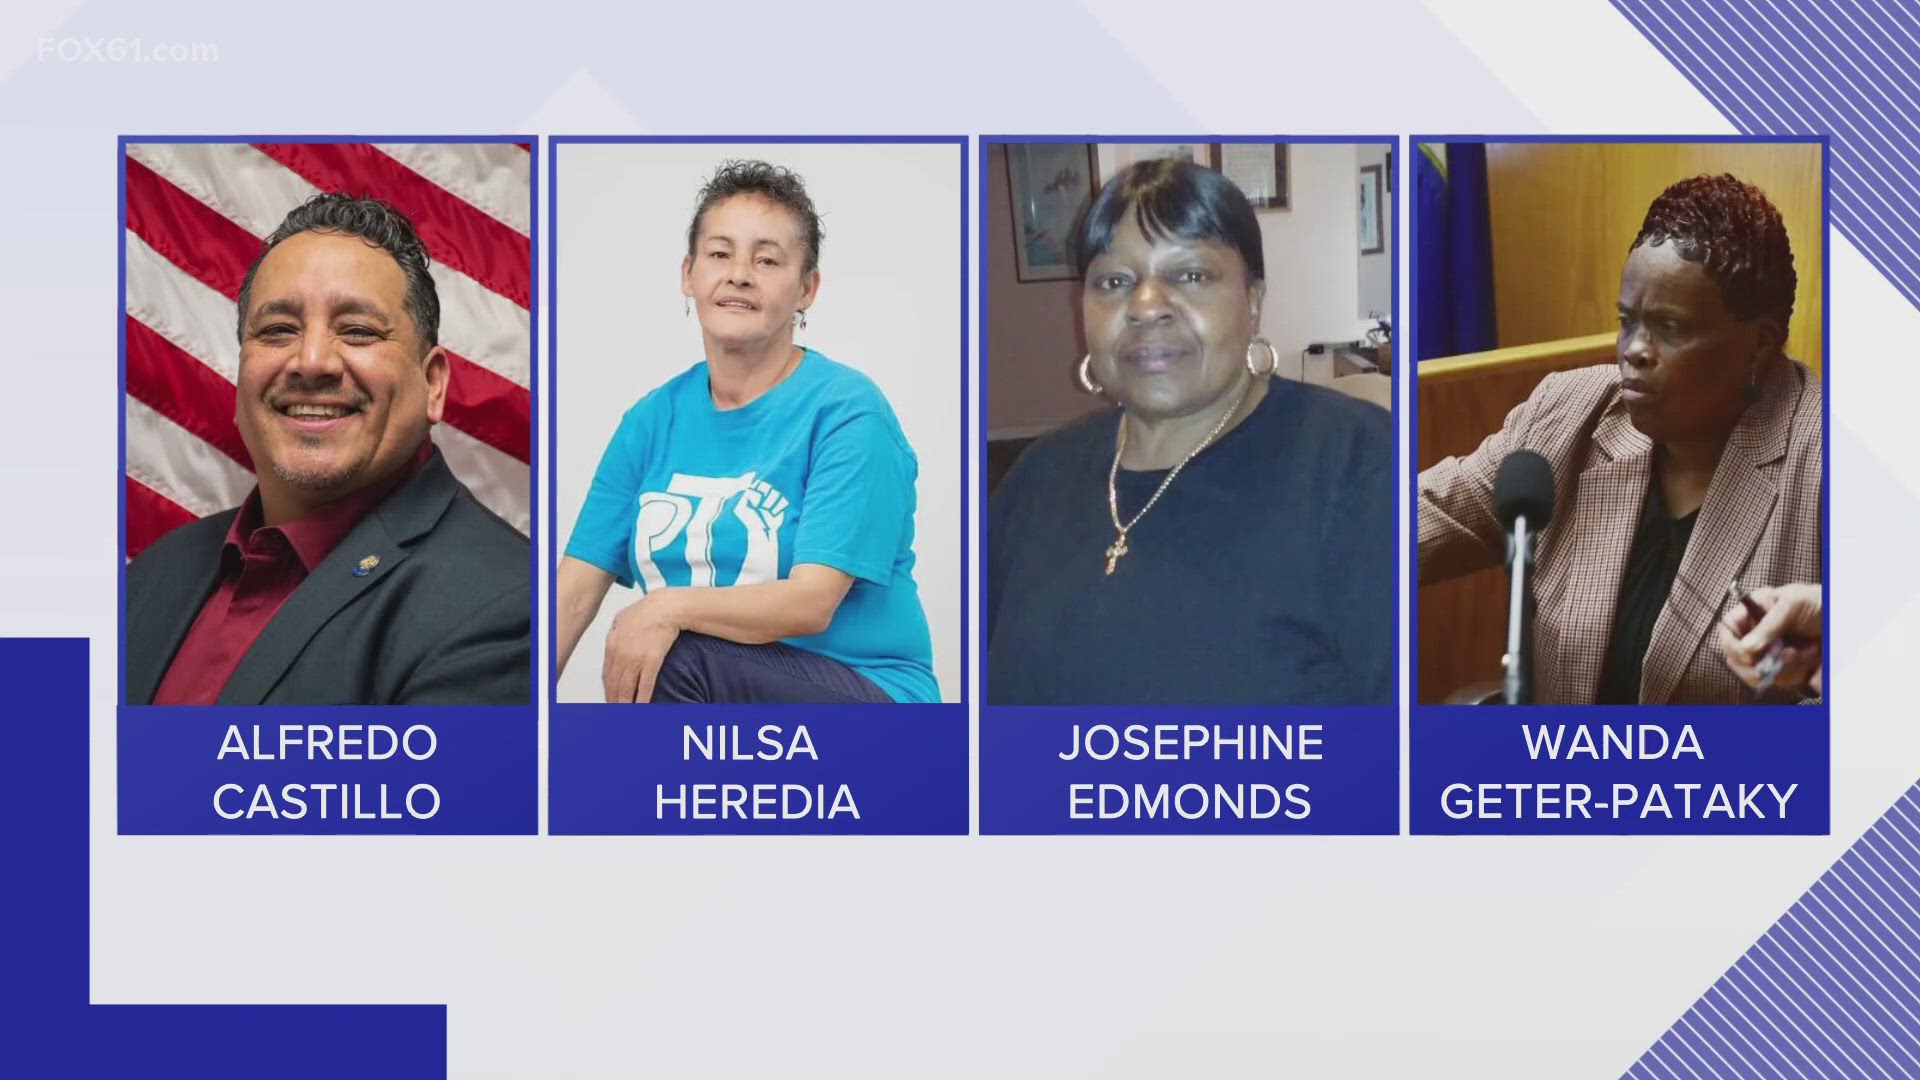 All charges relate to the 2019 Bridgeport Democratic Mayoral Primary, in connection with the misuse of absentee ballots.